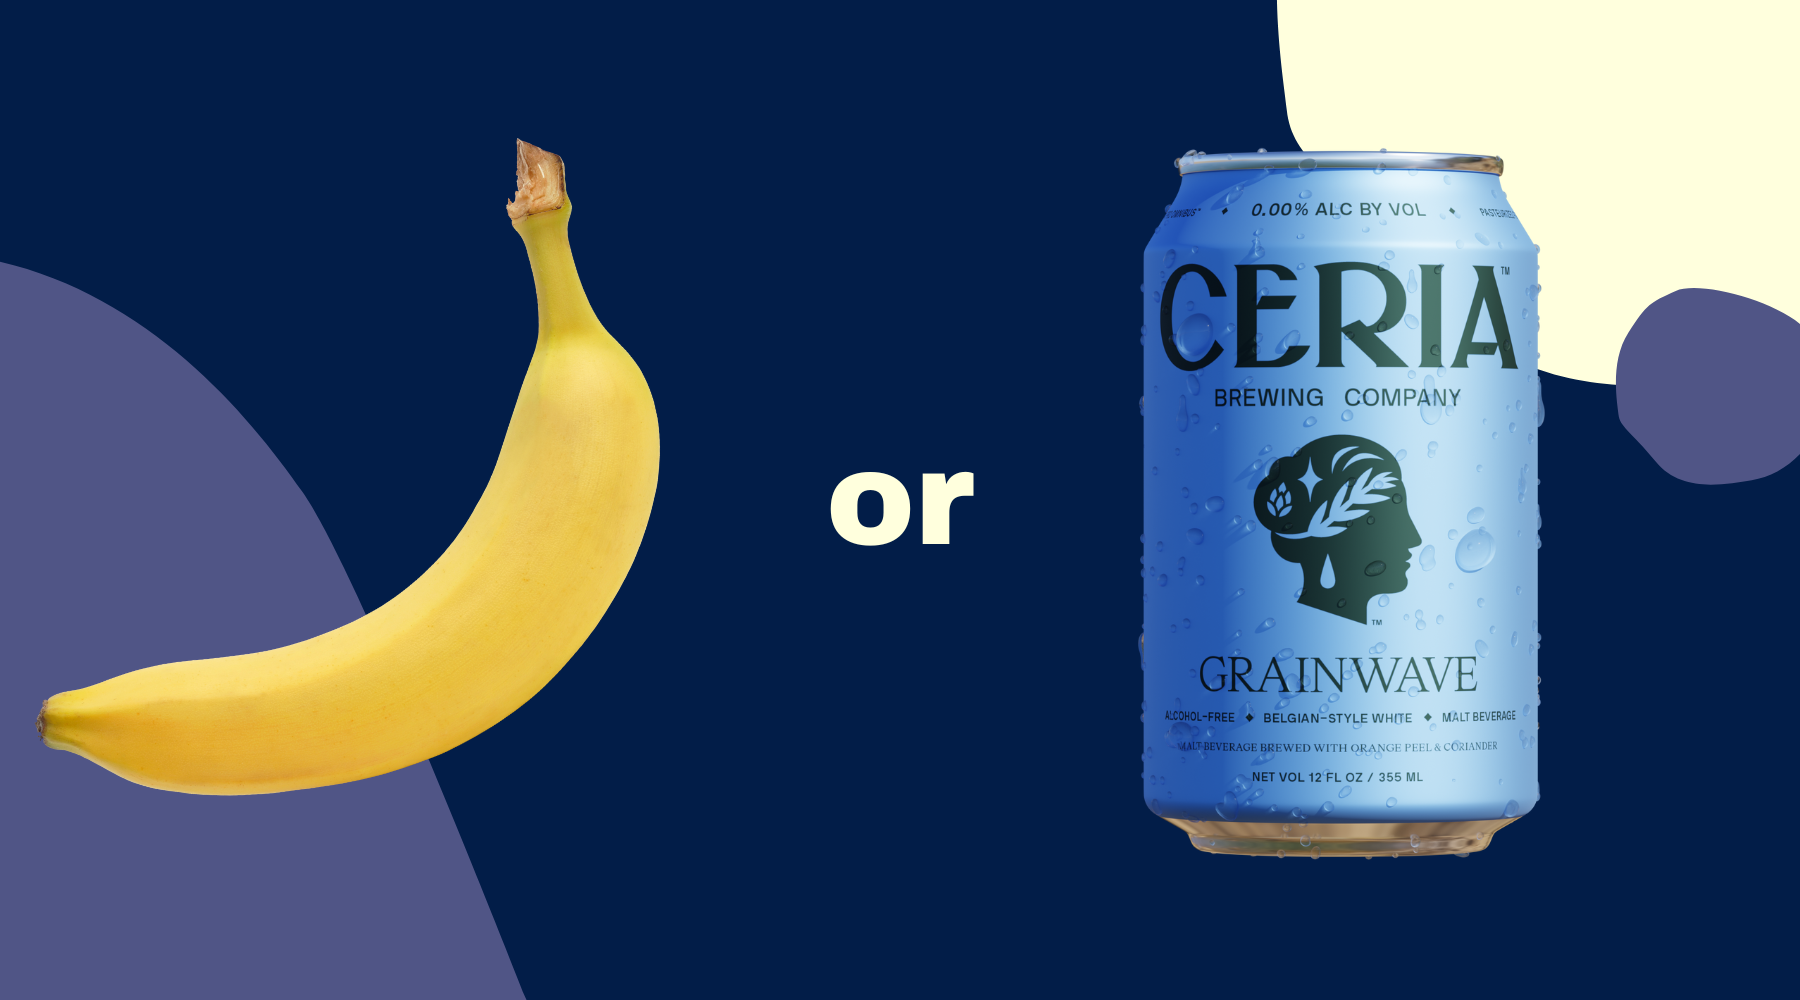 Which has a lower alcohol content?